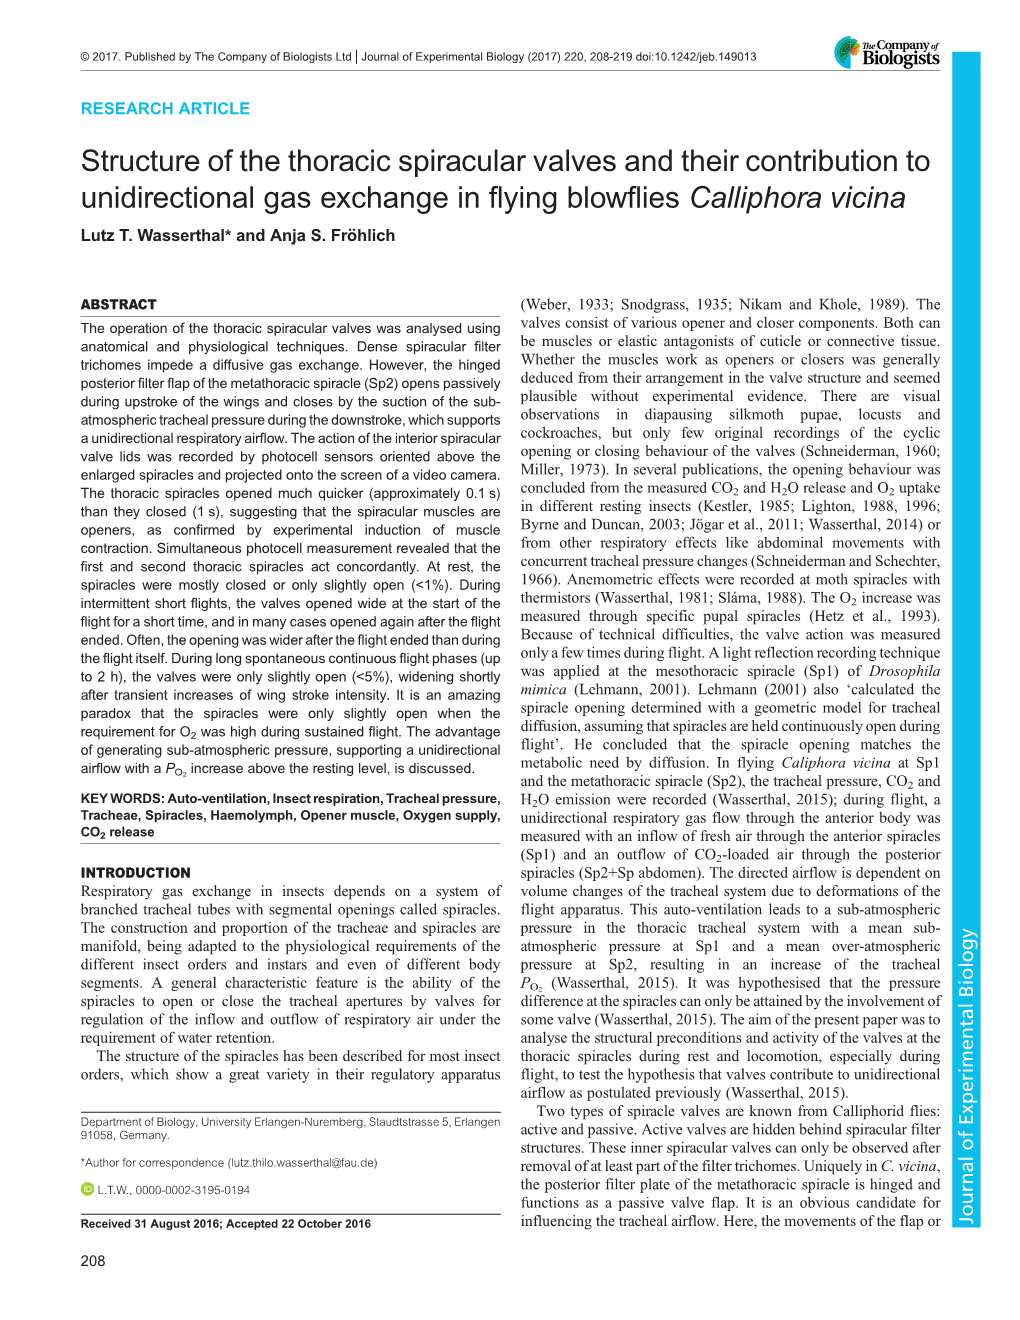 Structure of the Thoracic Spiracular Valves and Their Contribution to Unidirectional Gas Exchange in Flying Blowflies Calliphora Vicina Lutz T